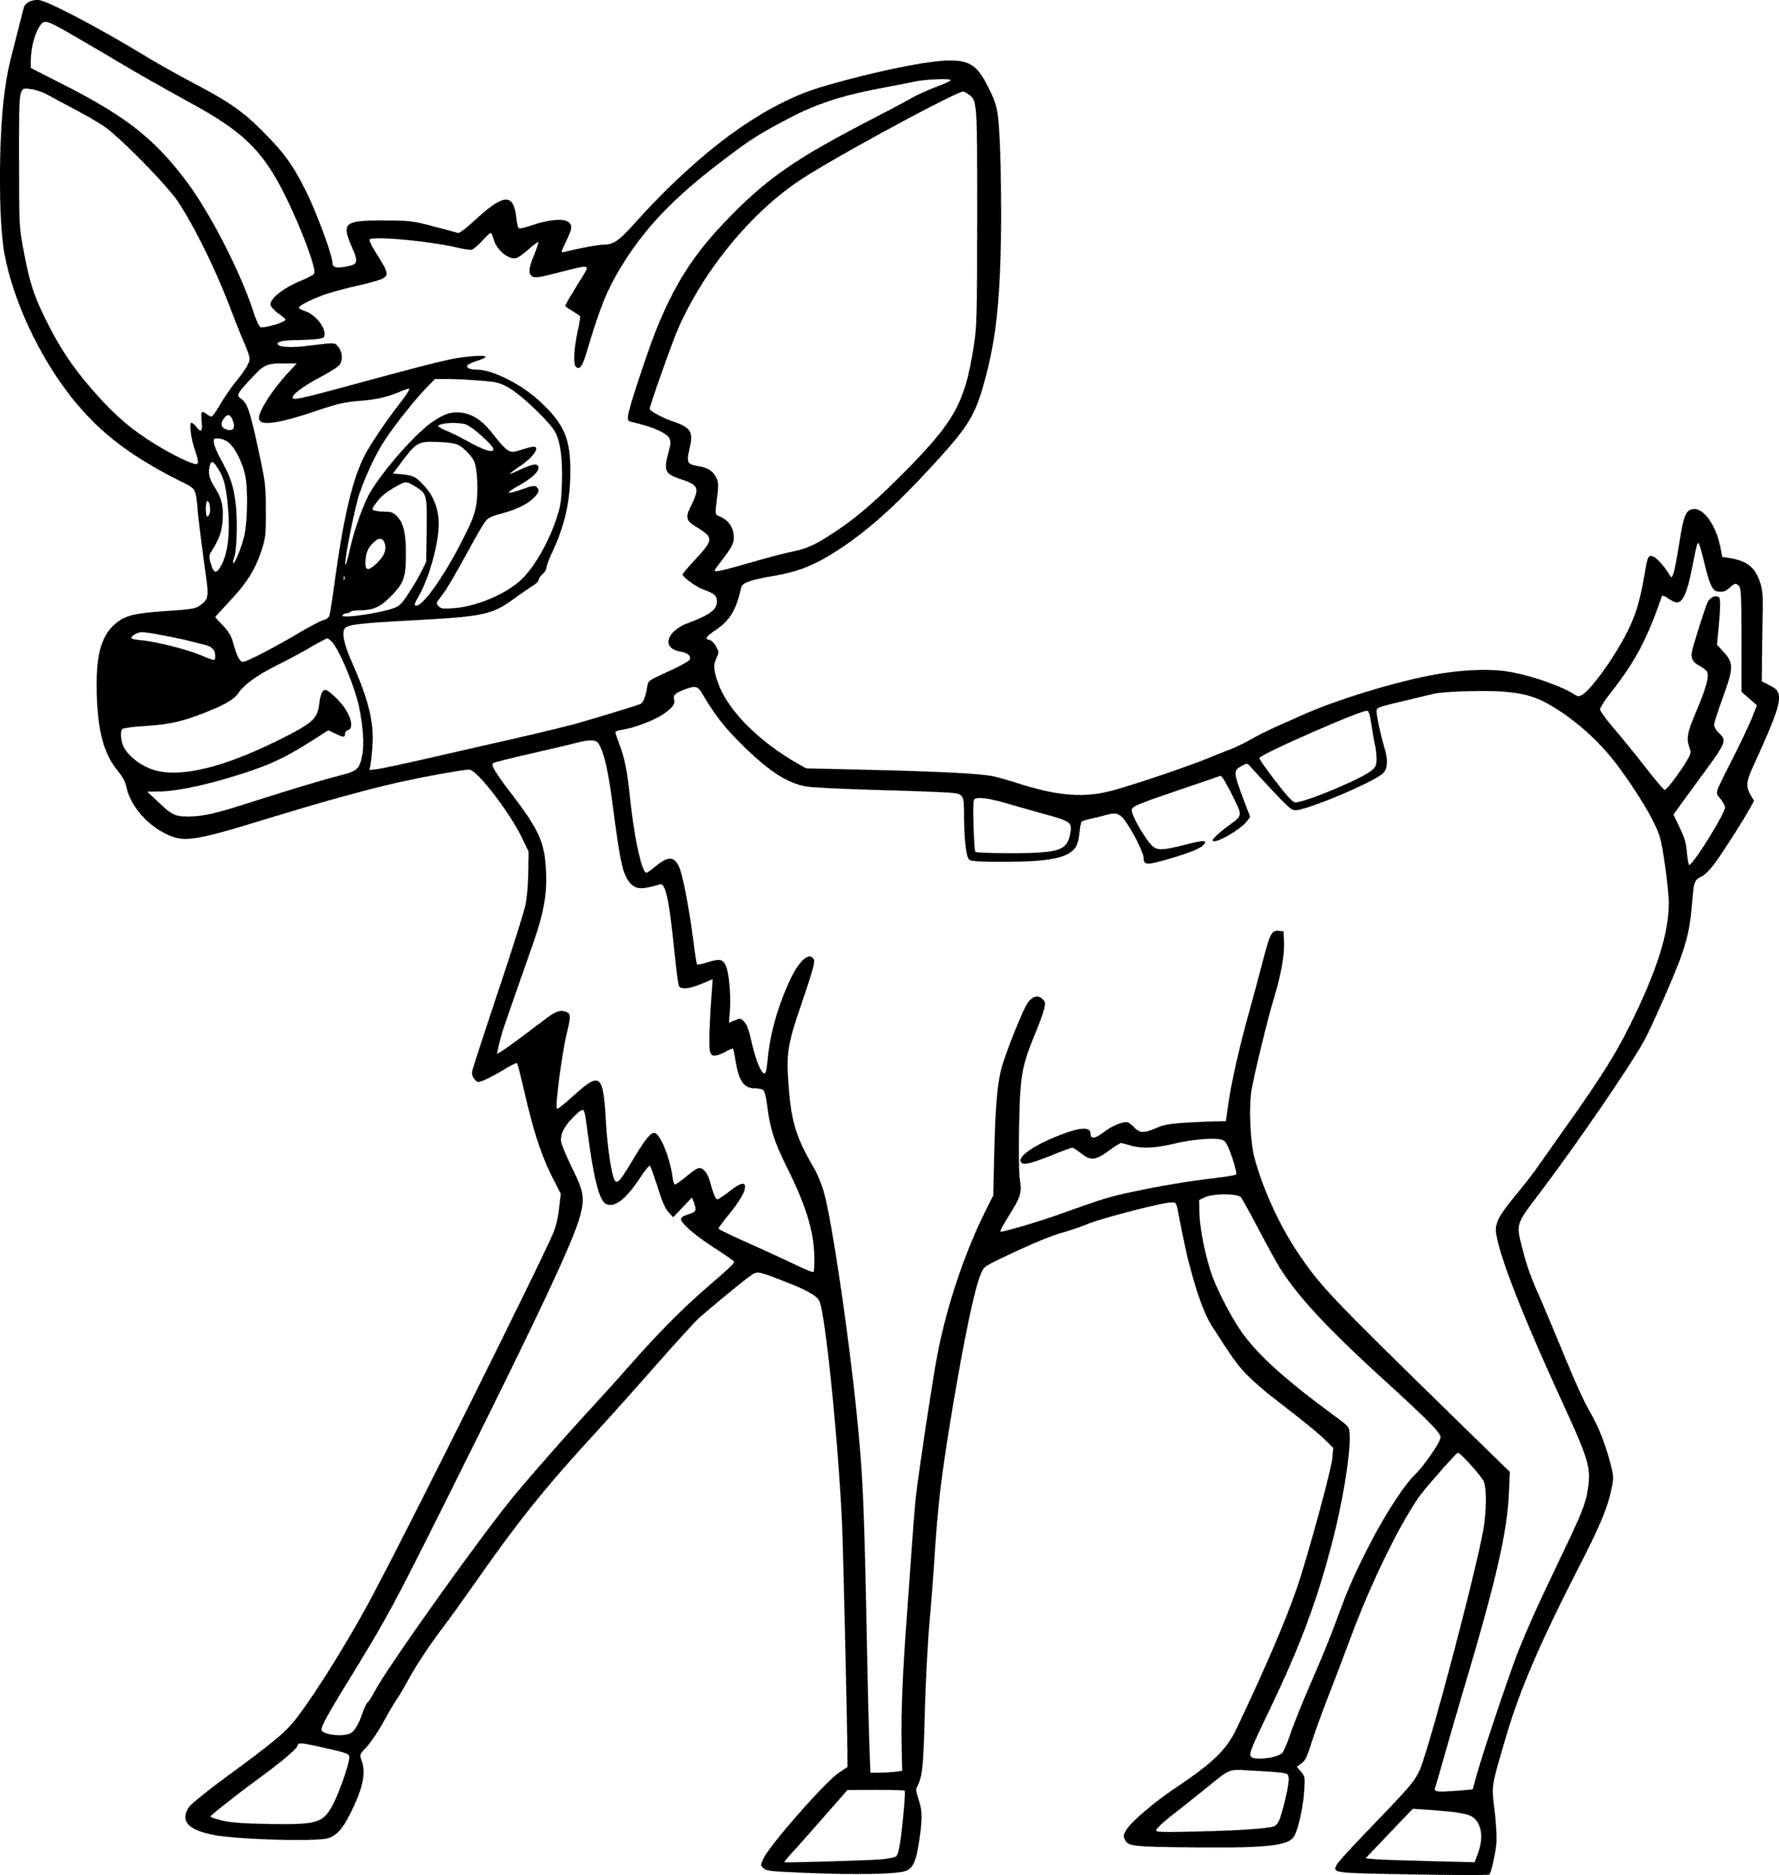 Fawn Deer Coloring Pages